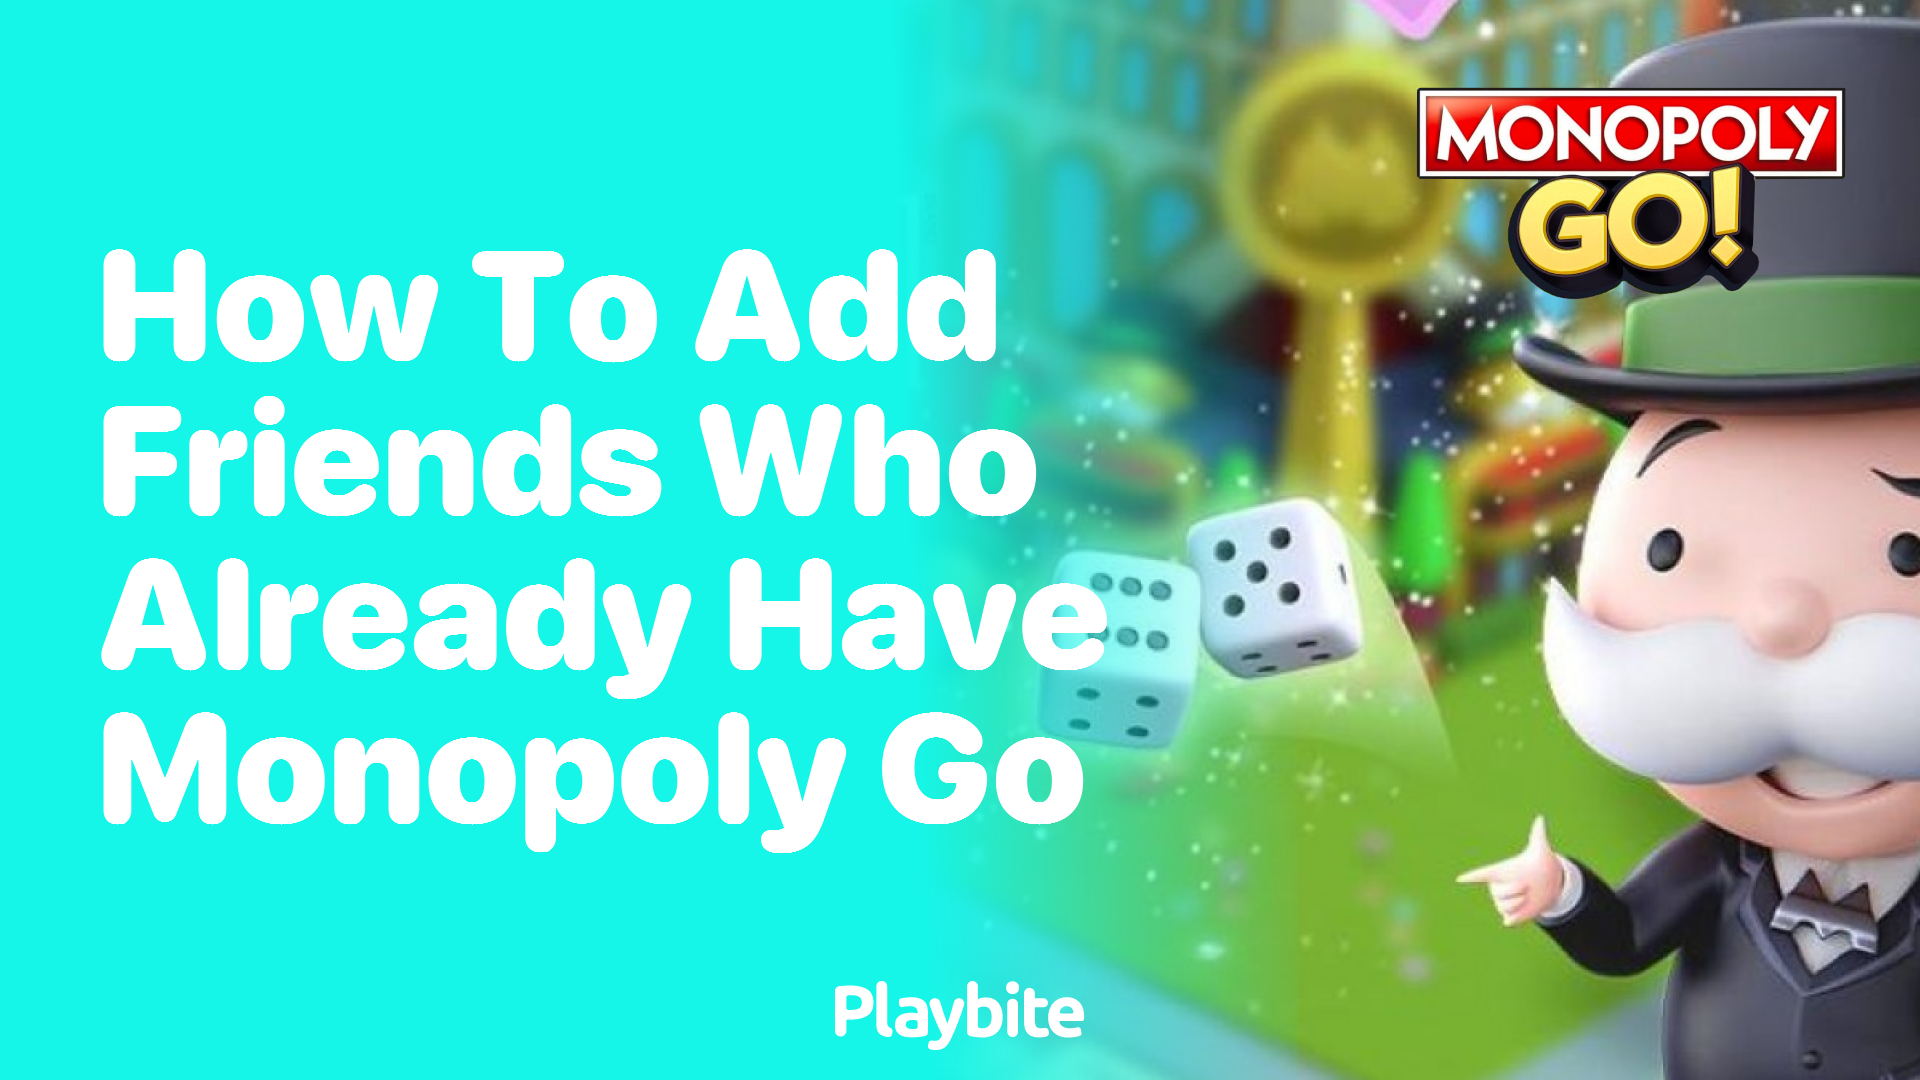 How to Add Friends Who Already Have Monopoly Go